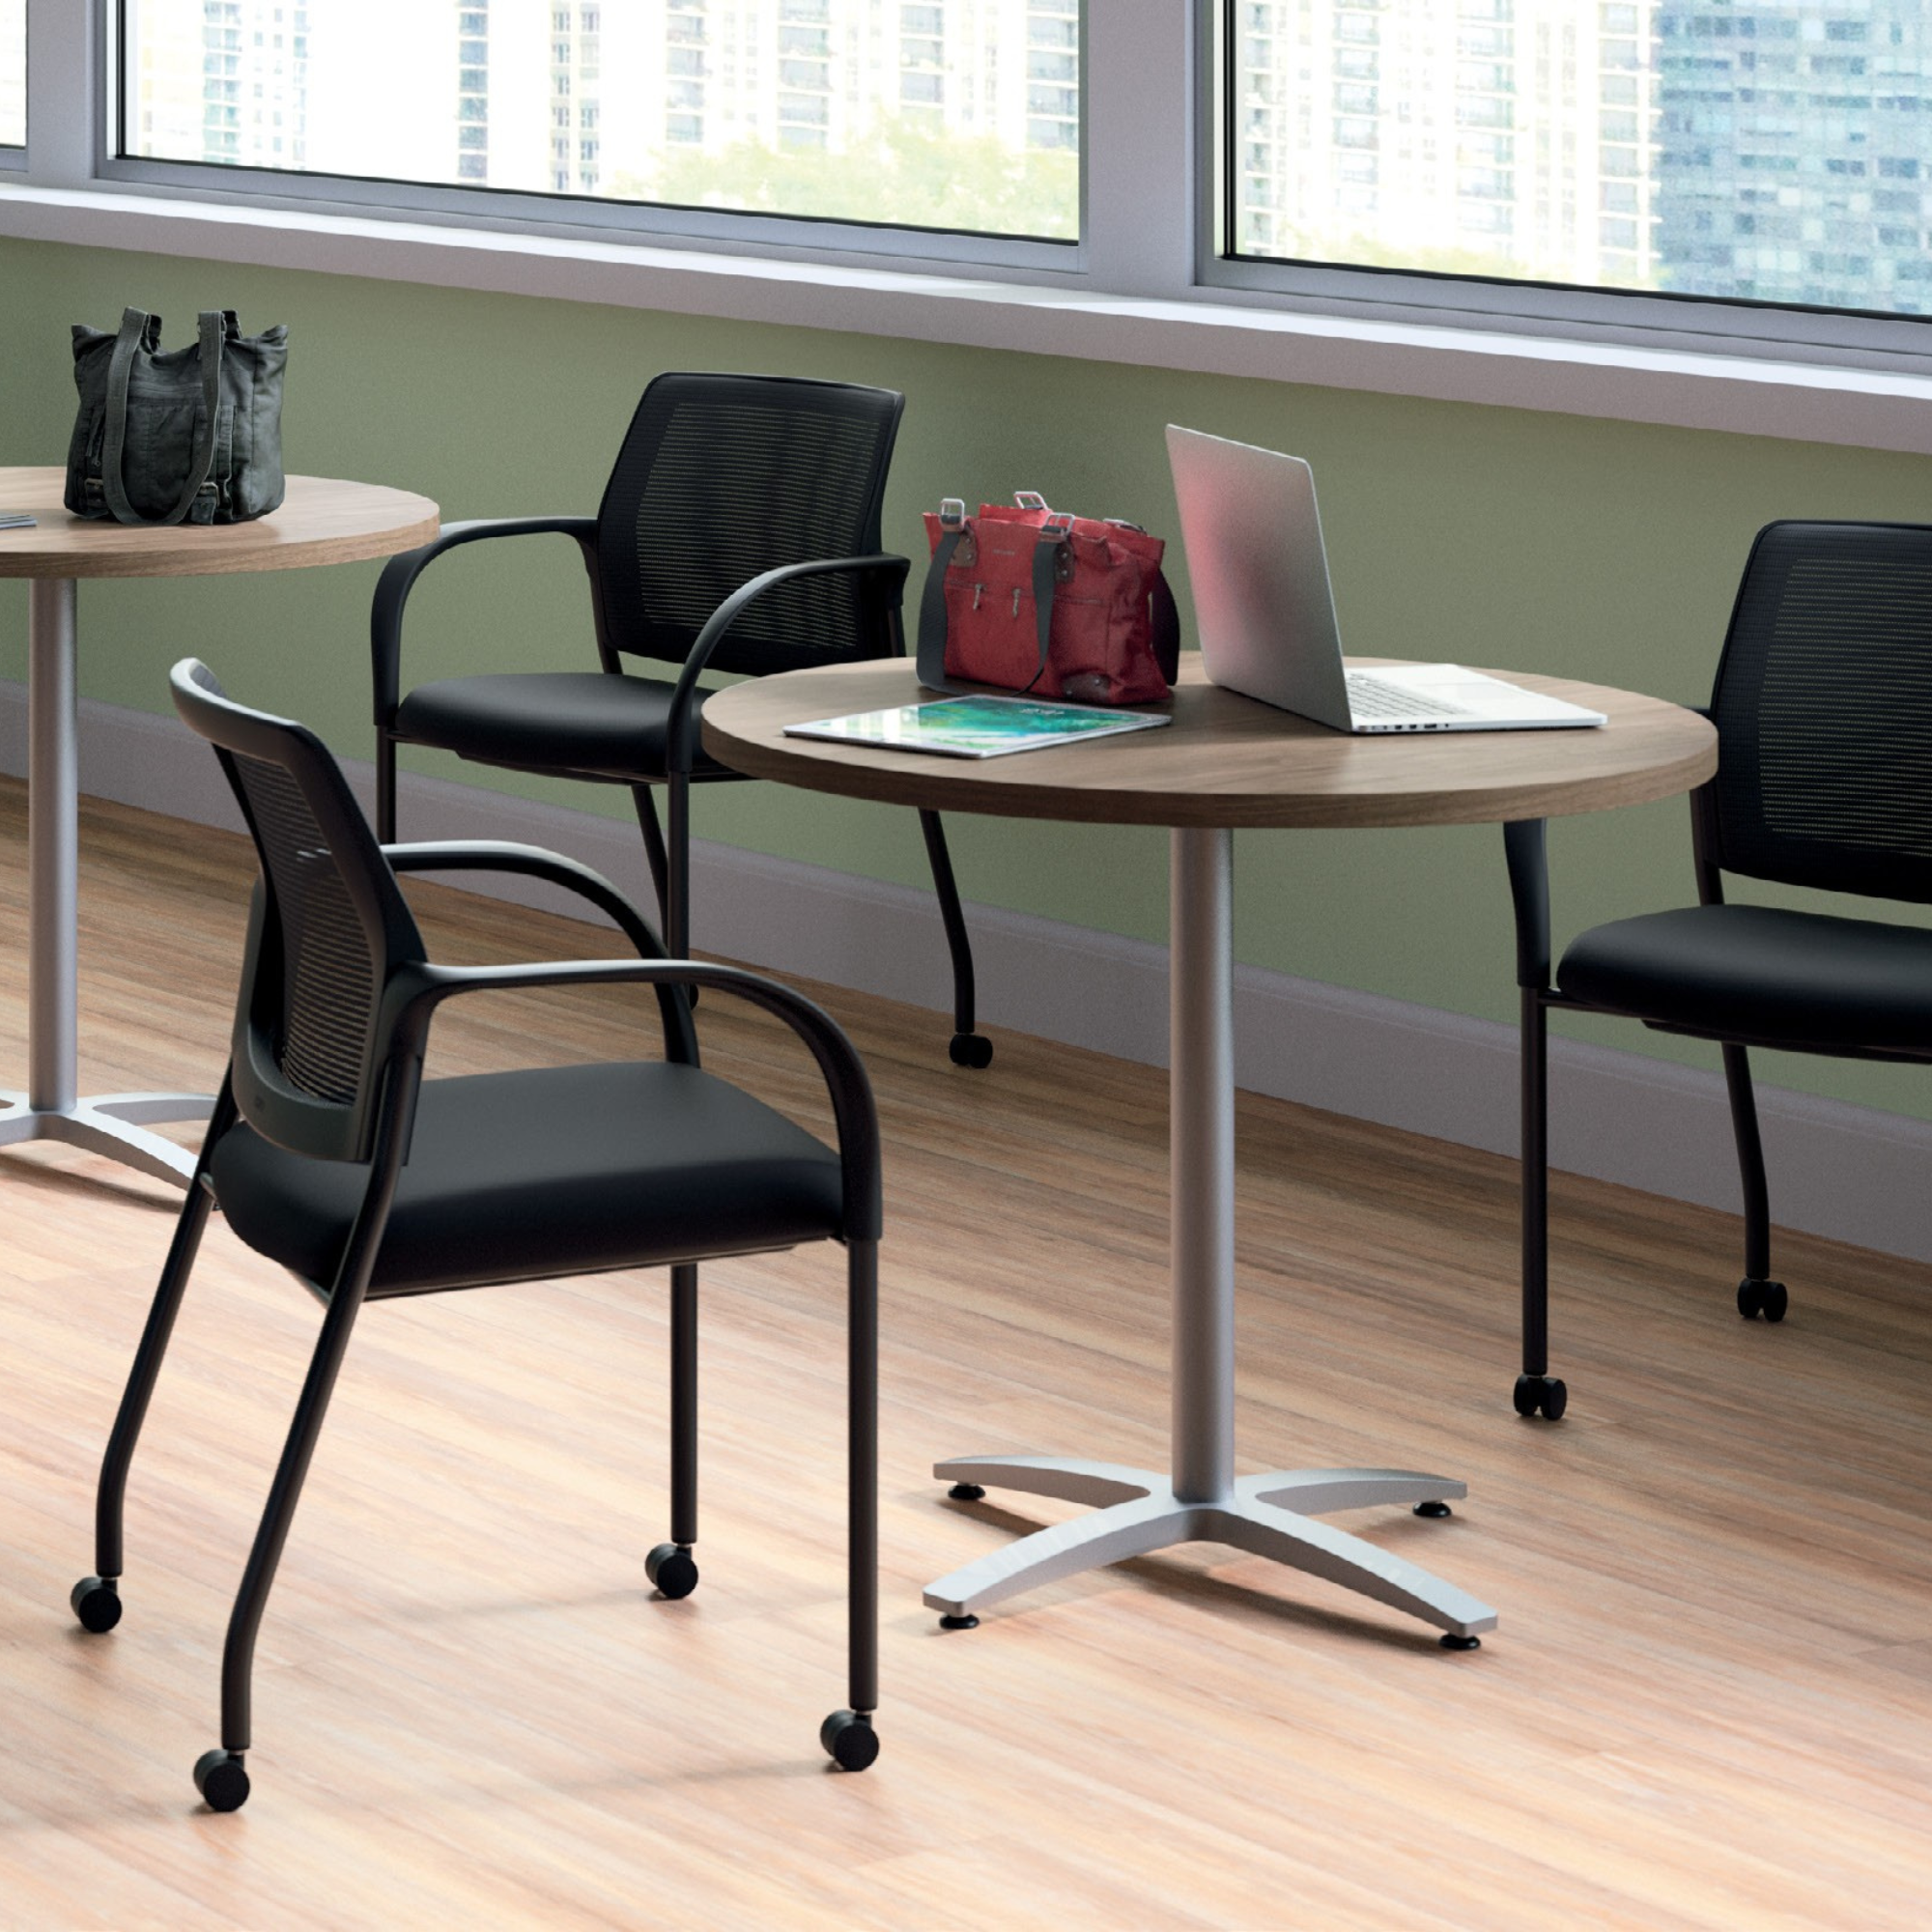 Steelcase Node Tripod Base with Worksurface – Citron - Mark Downs Office  Furniture - Baltimore, Maryland